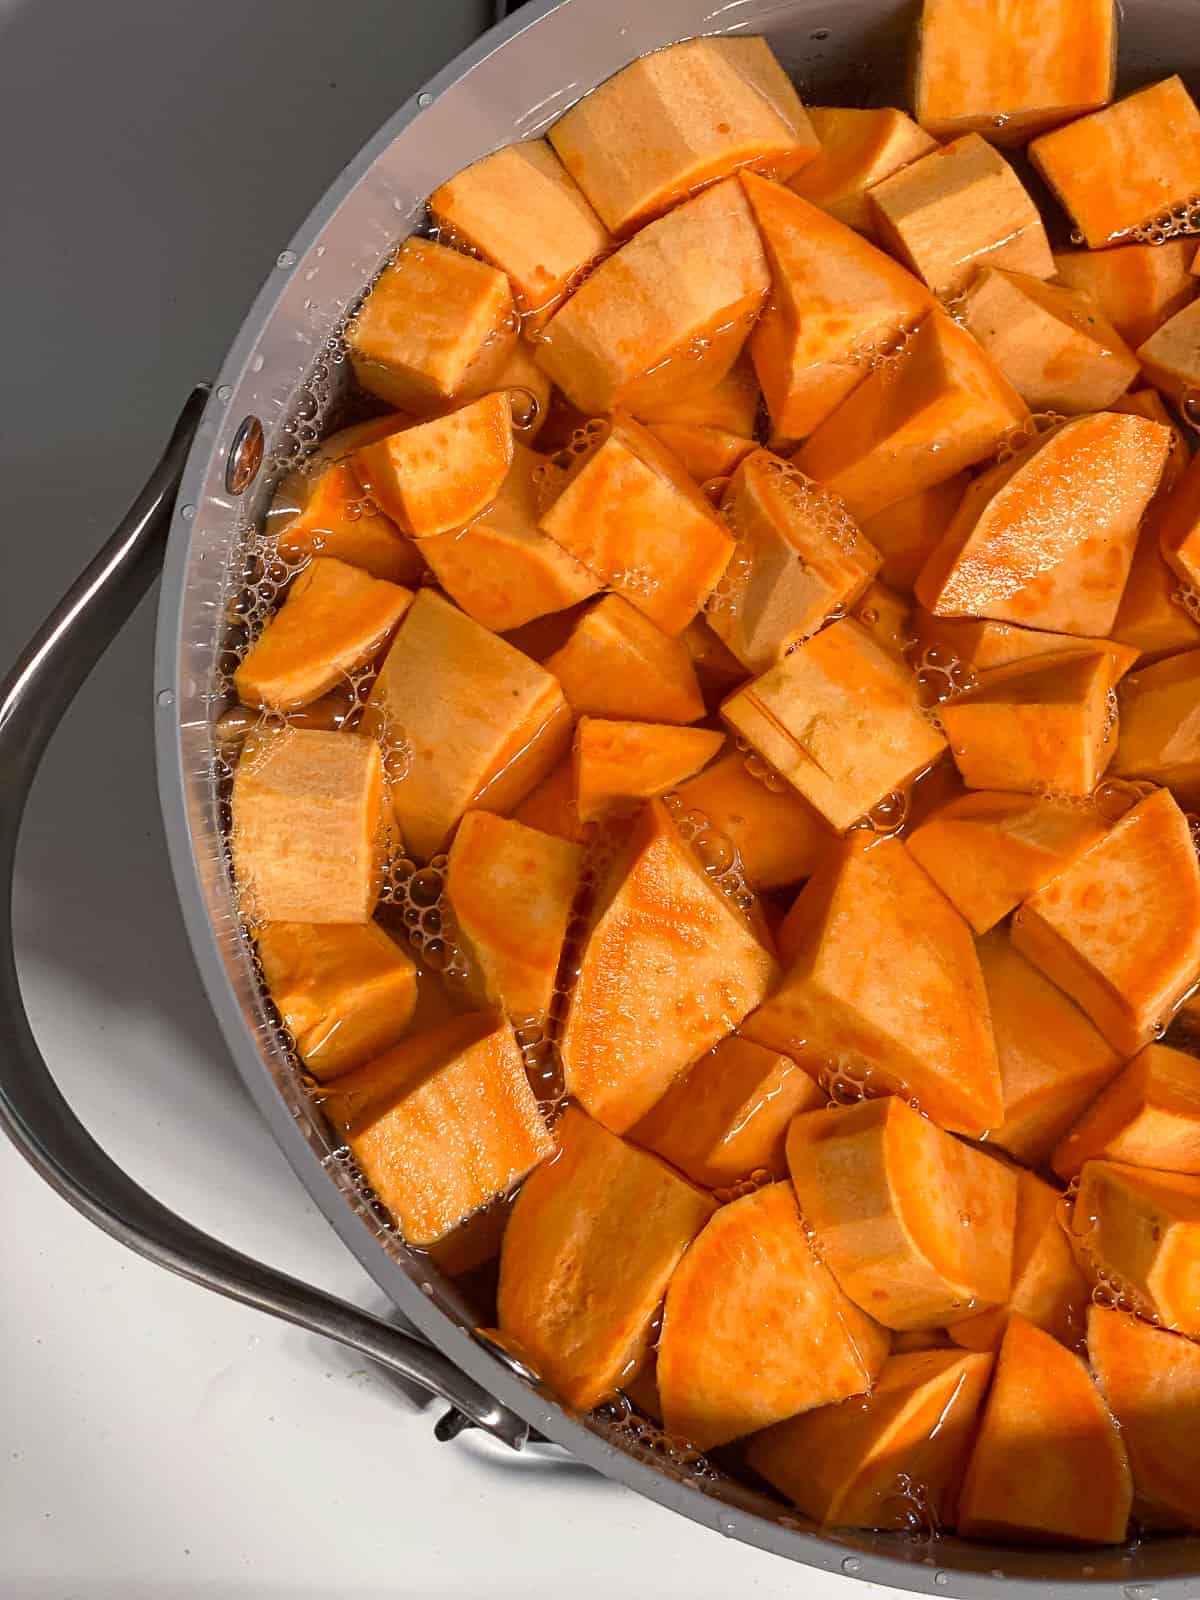 Large pot of chopped and peeled sweet potatoes submerged in water.